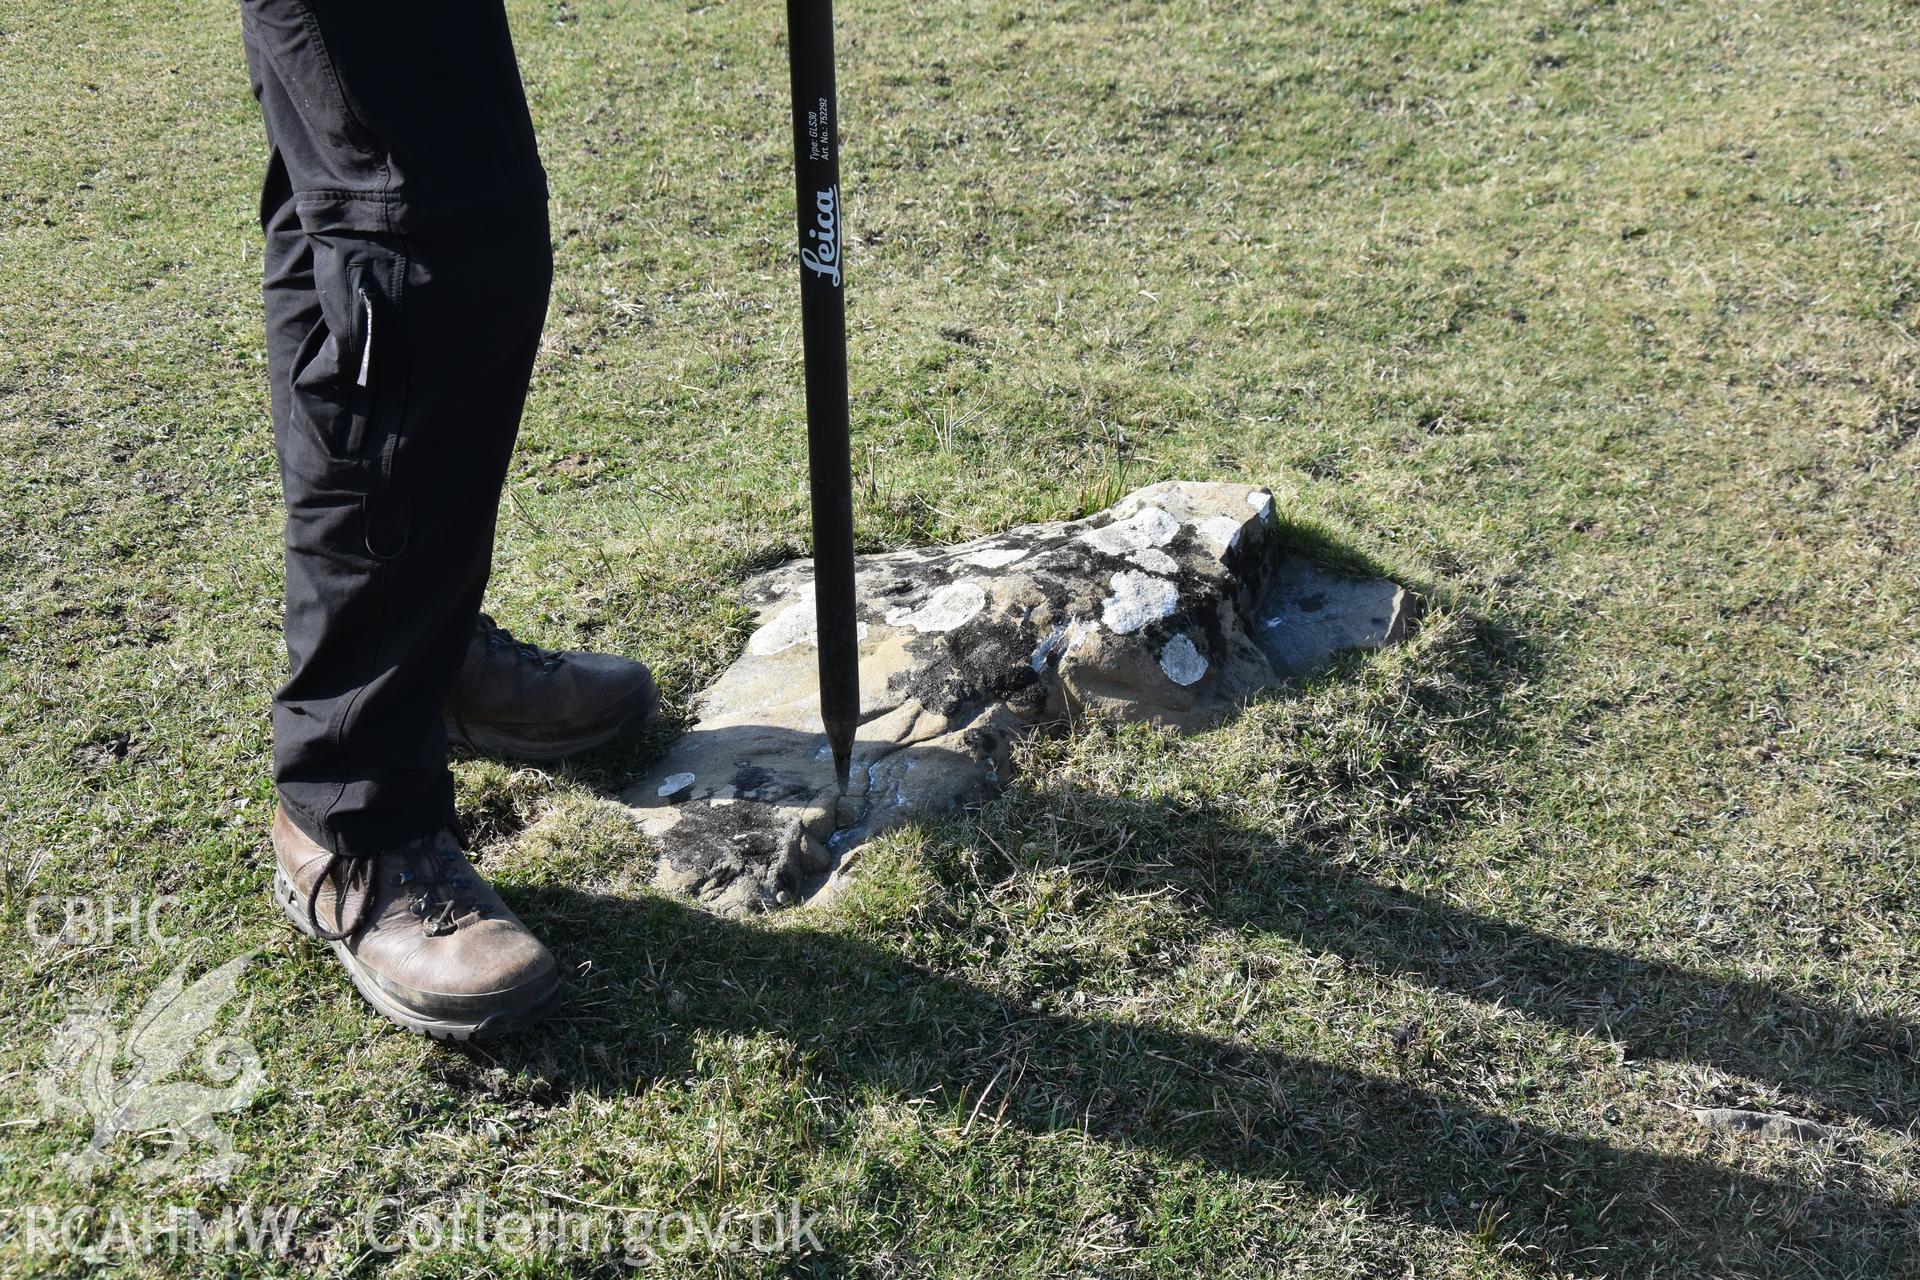 CHERISH project team measuring location of survey marker. From photographic survey of Castell Bach (NPRN 93914) by Dr Toby Driver for site monitoring 27/03/2019.
Produced with EU funds through the Ireland Wales Co-operation Programme 2014-2020. All material made freely available through the Open Government Licence.